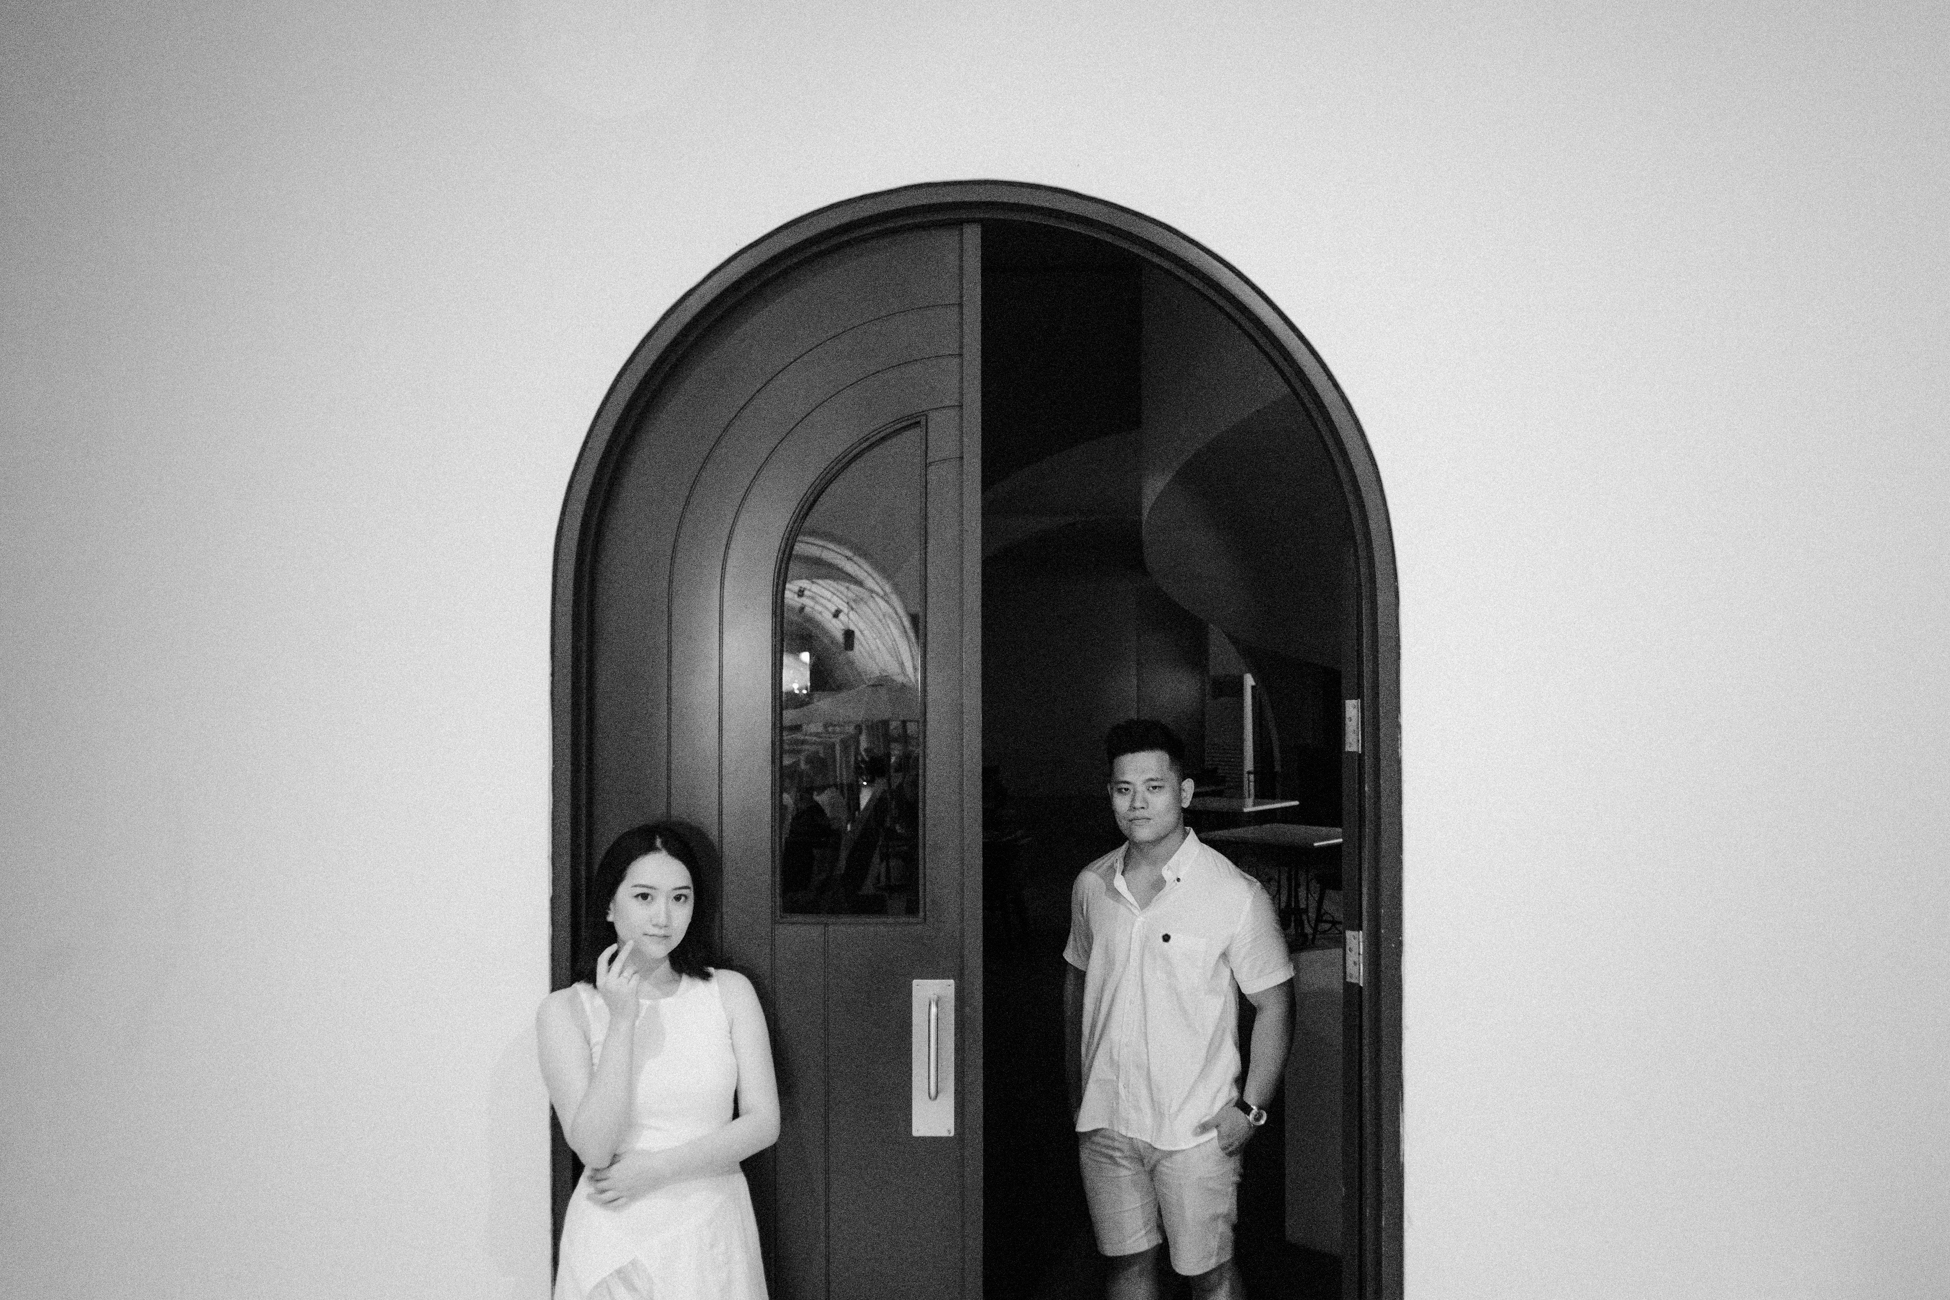 Pre-wedding photo session in front of the door in black and white